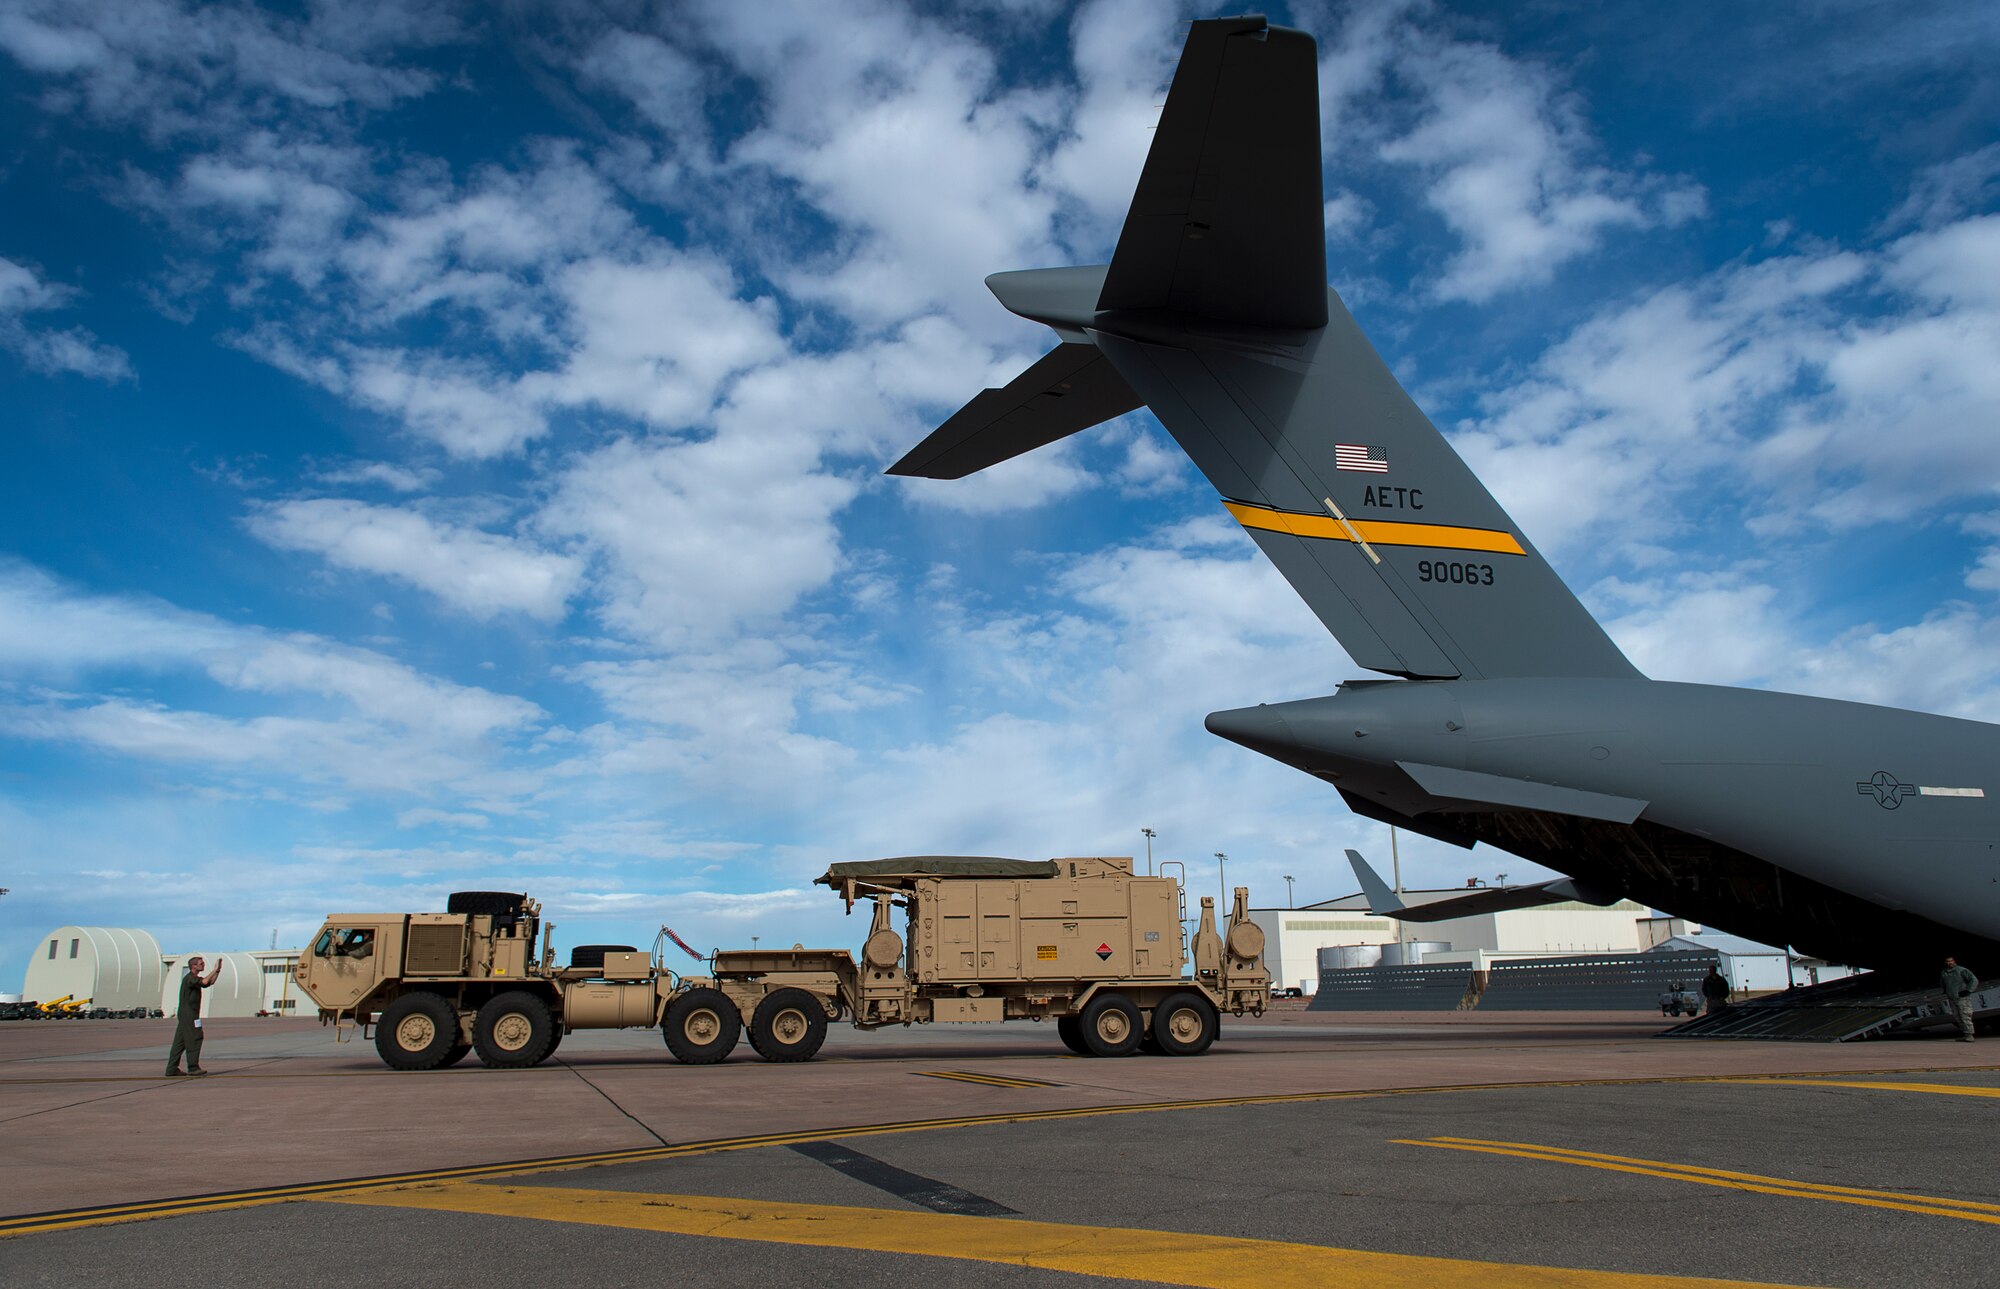 U.S. Air Force Tech. Sgt. Jerry Daniels, a loadmaster instructor with the 58th Airlift Squadron, directs a U.S. Army Soldier assigned to the 4th Battalion 3rd Air Defense Artillery Regiment, while he backs a vehicle onto a C-17 Globemaster III